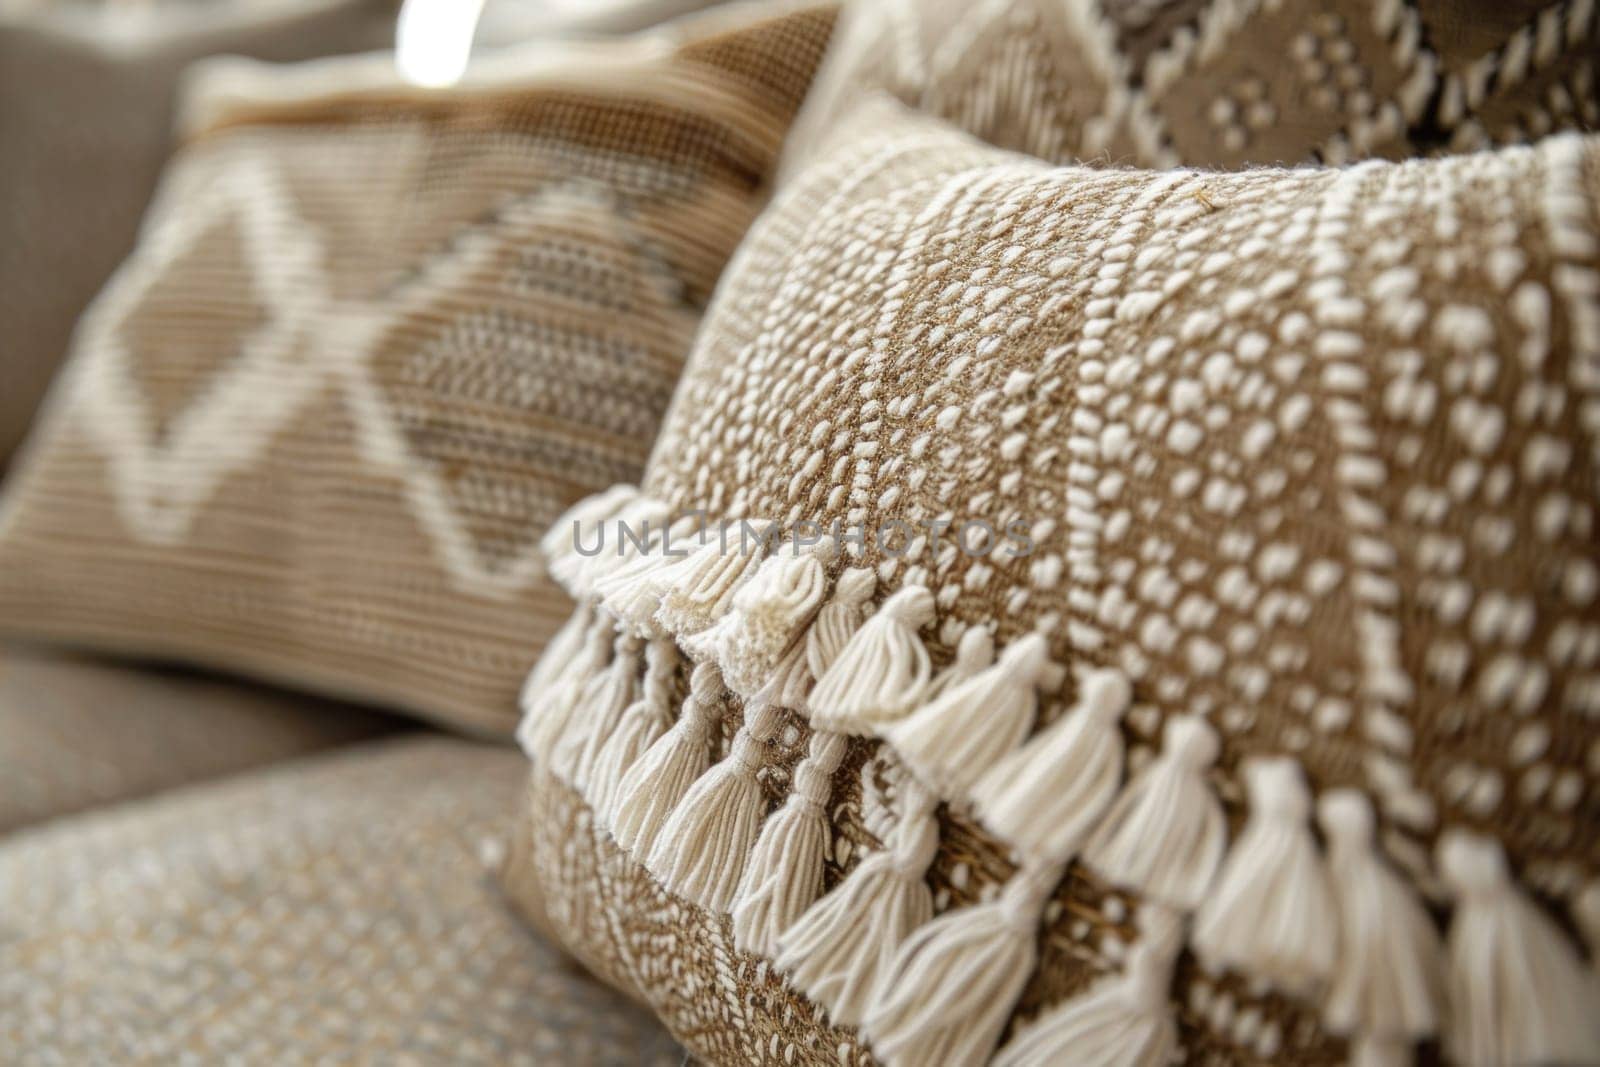 Decorative pillows with tassels and fringe in close up view for home interior design inspiration